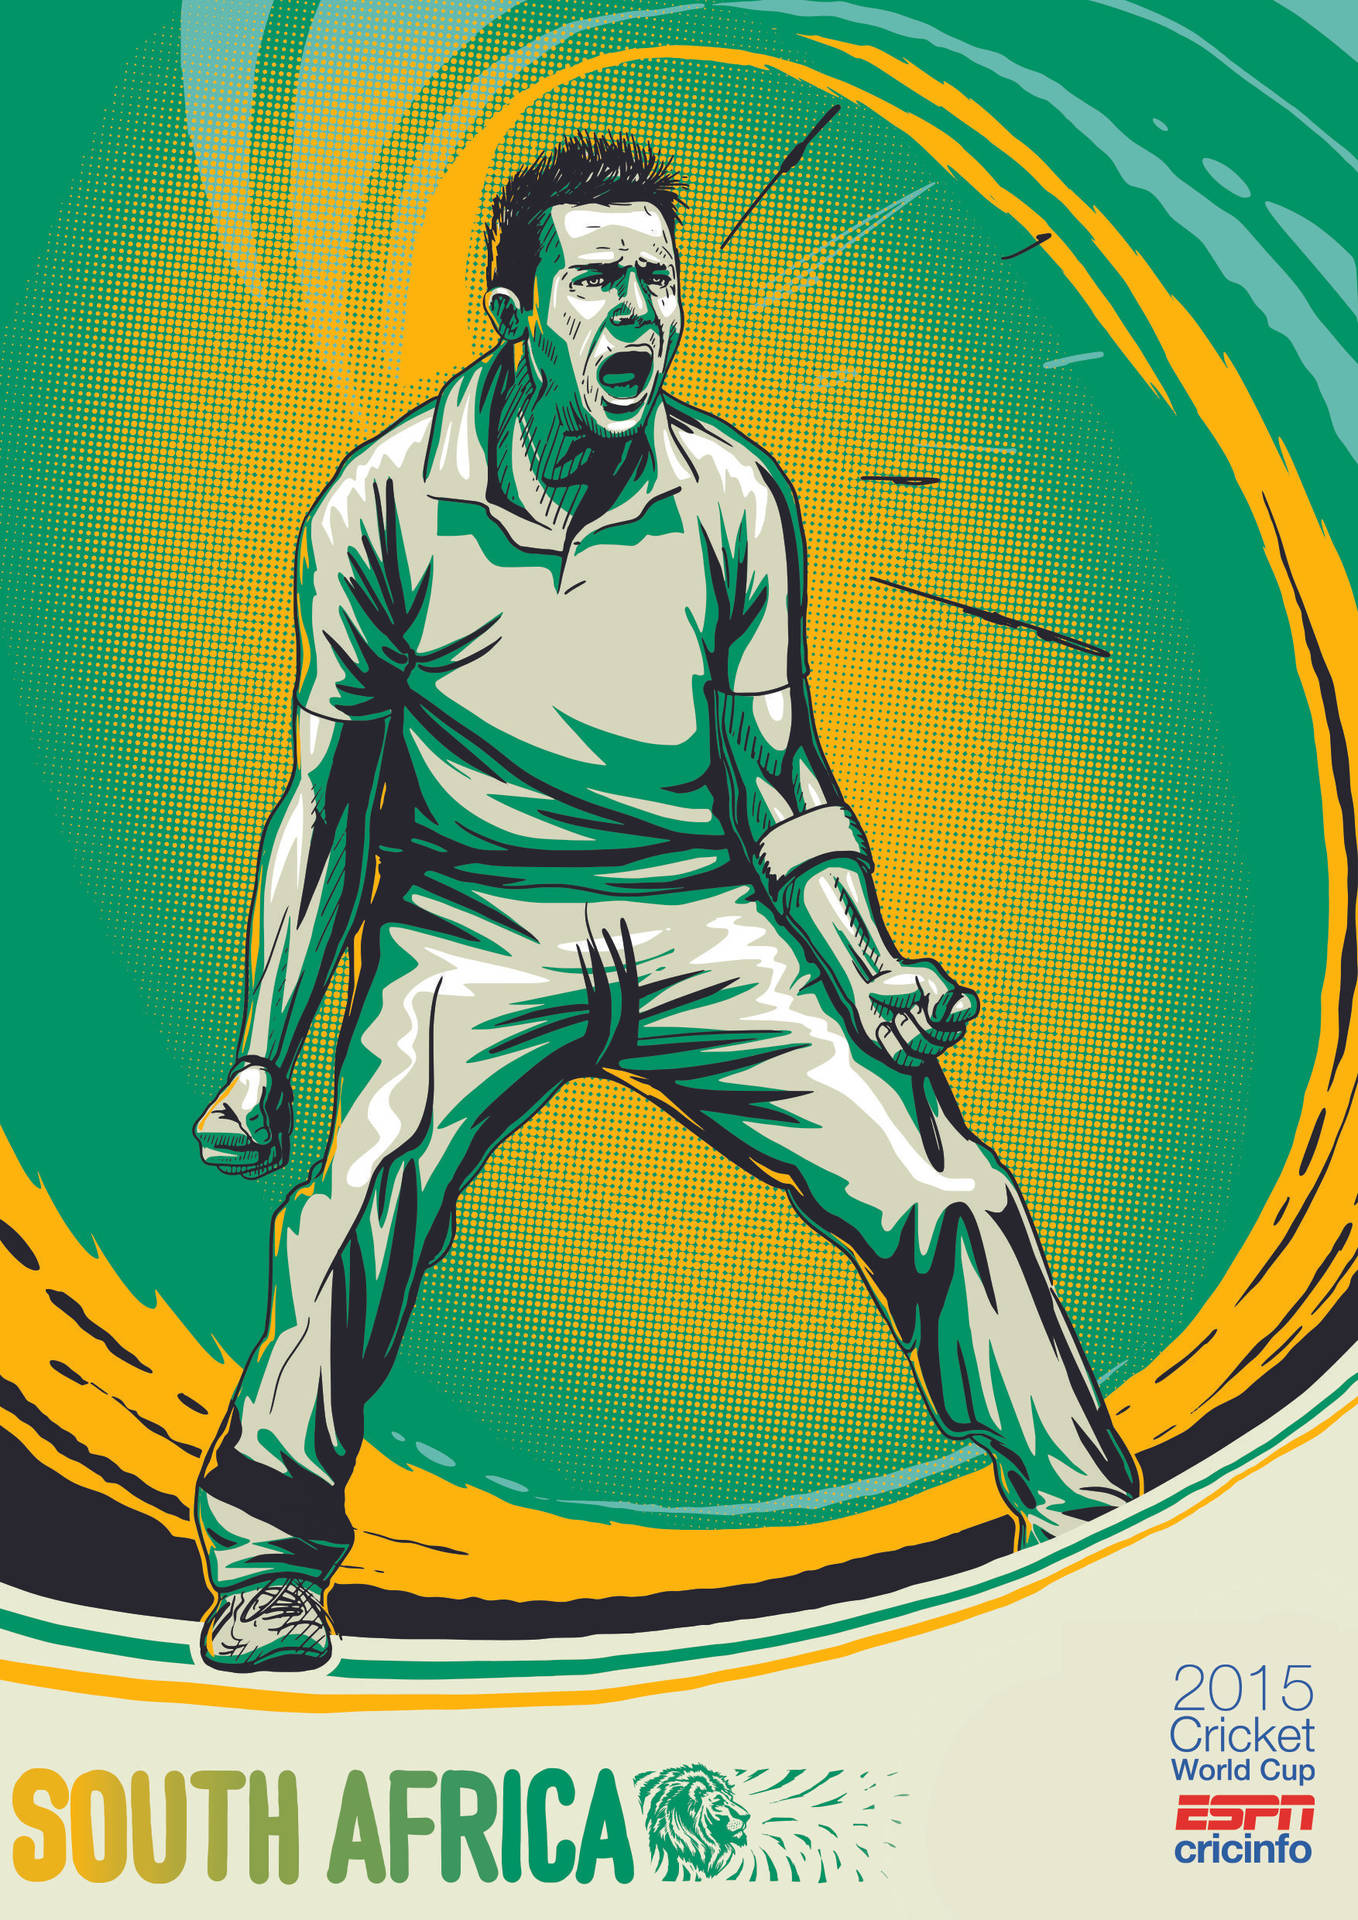 South Africa Cricket World Cup Poster Background